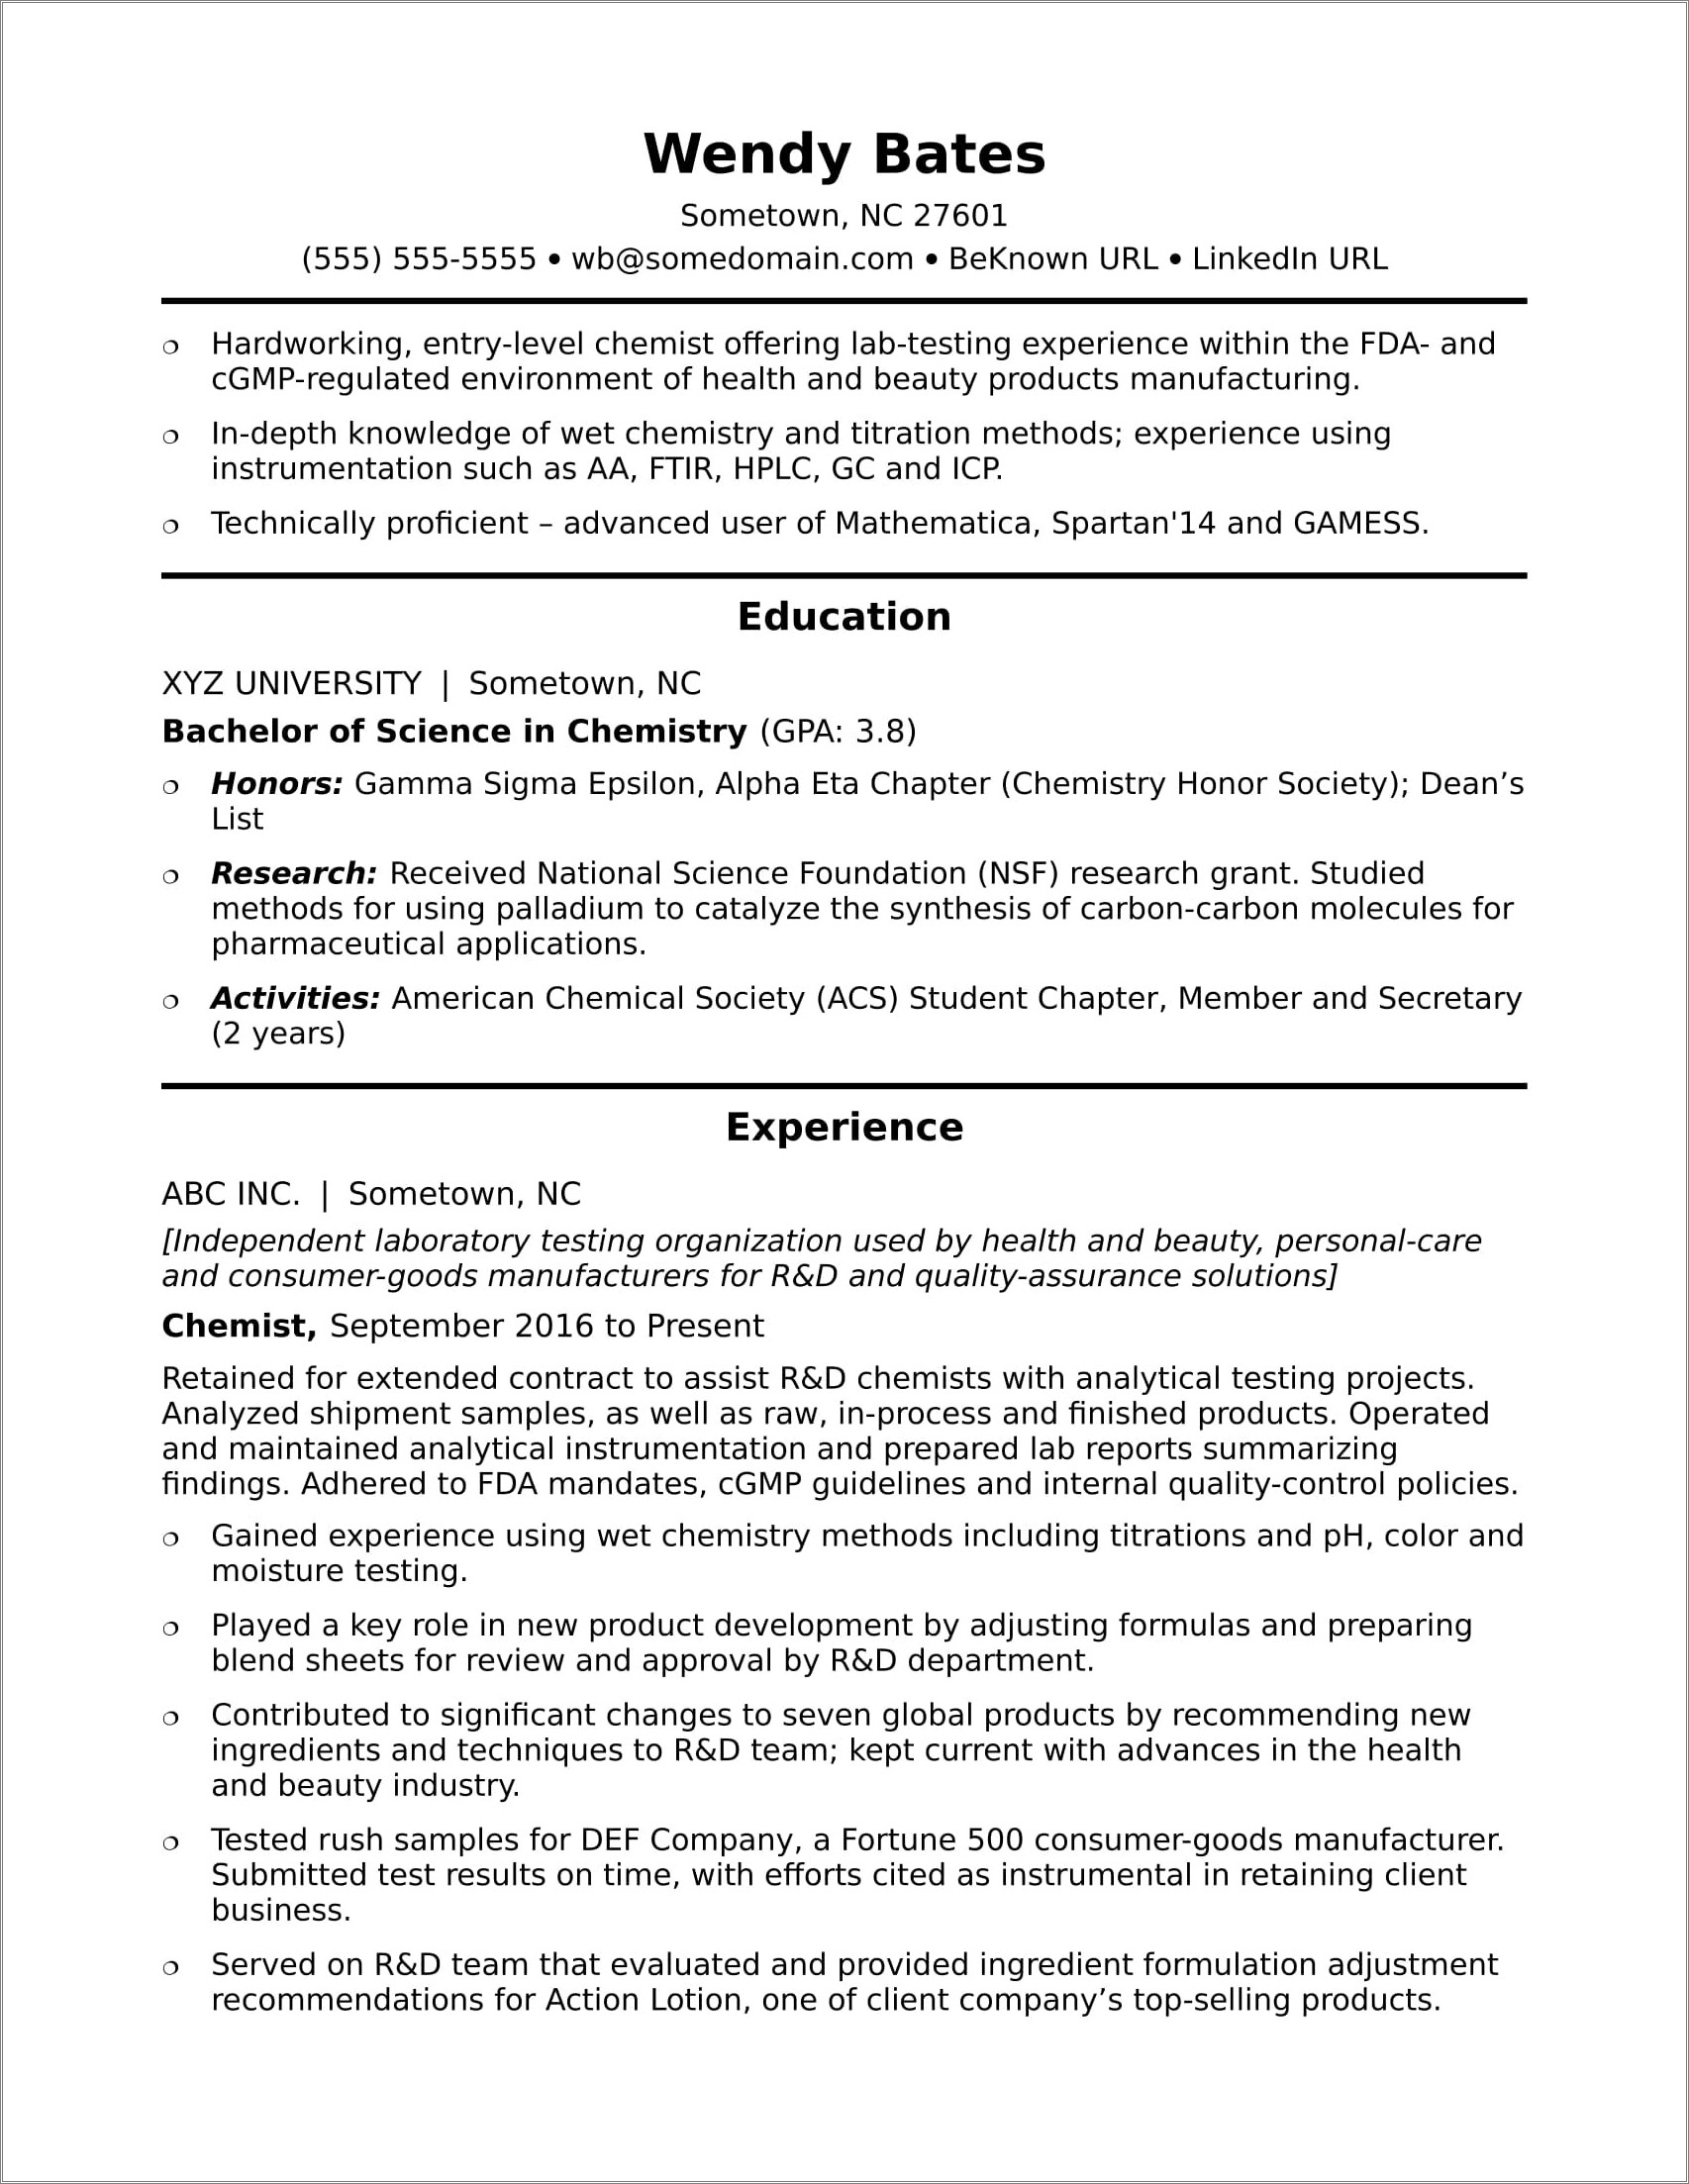 Entry Level Quality Assurance Resume Examples